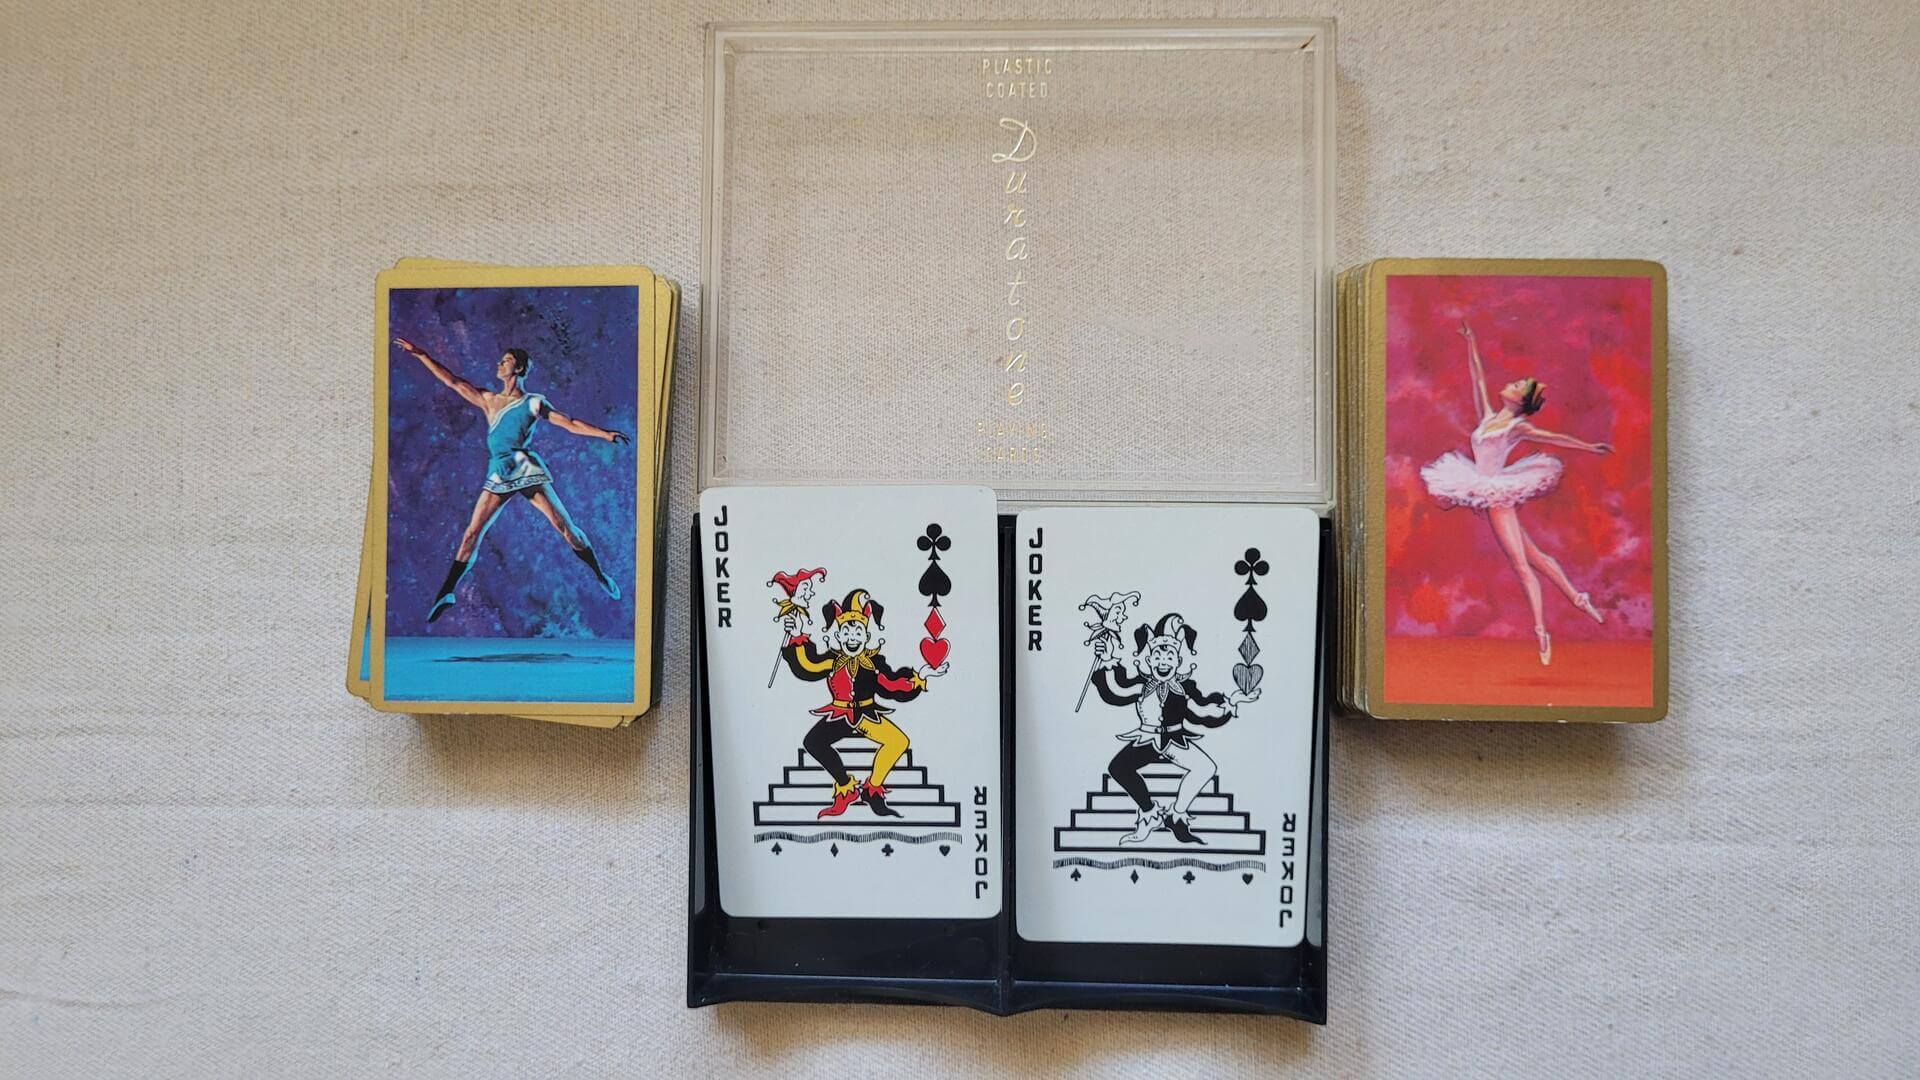 Vintage double deck of ARRCO Duratone playing cards in hard case with colourful ballerina & standing jokers design - made in USA collectible games and cards